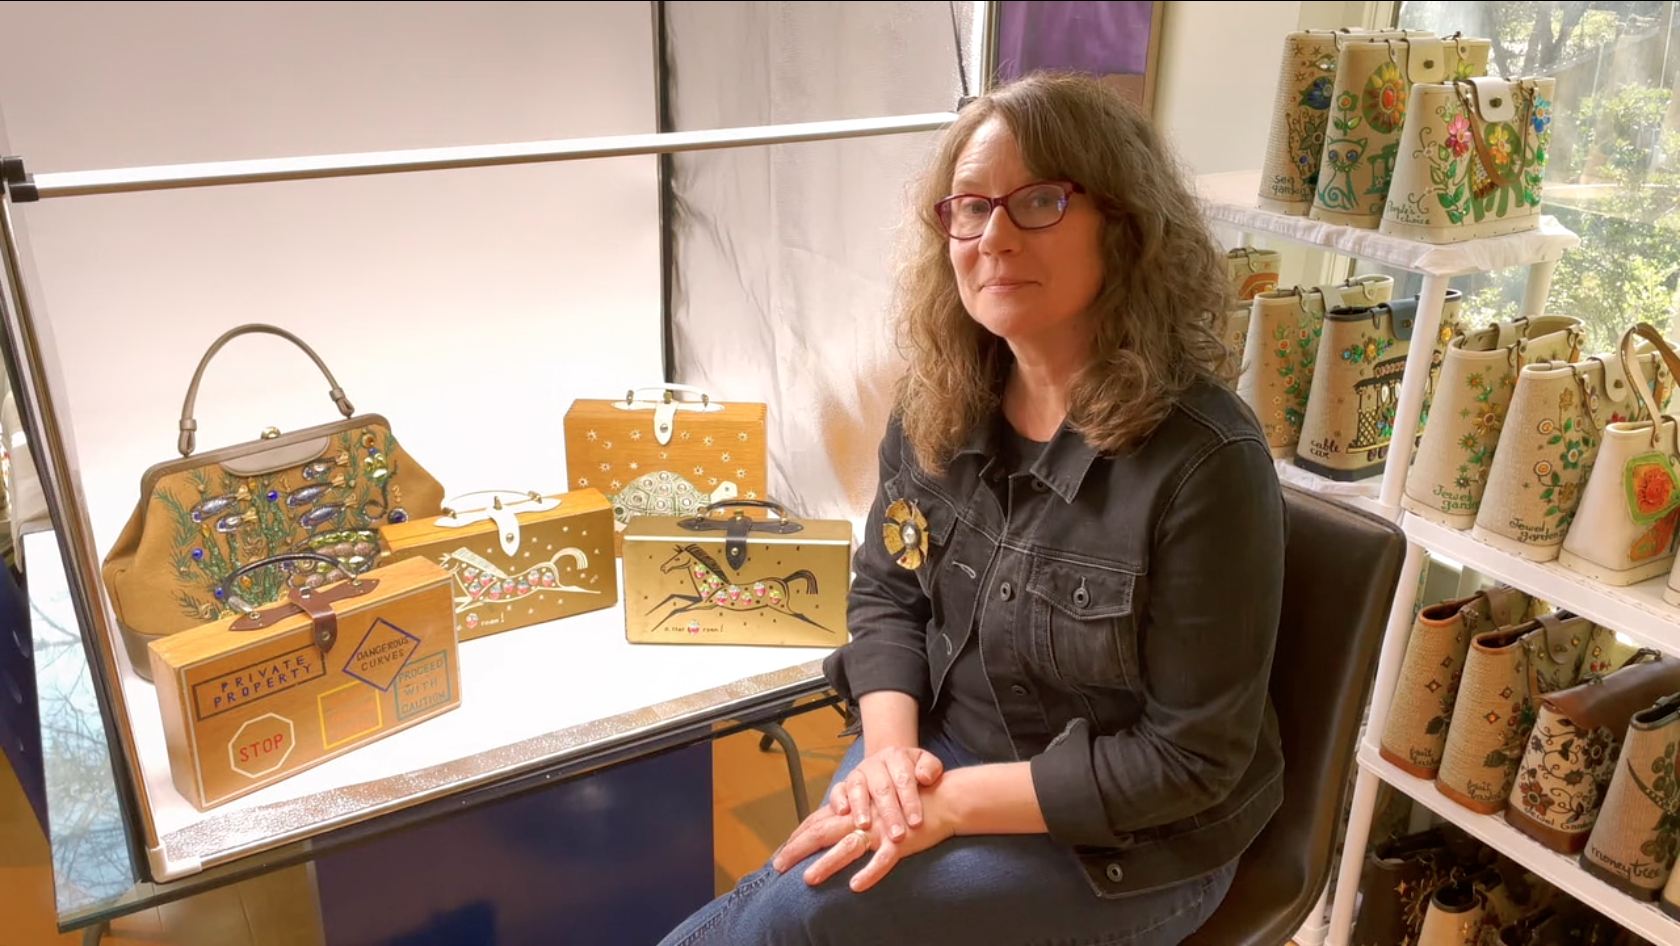  "Only one of these is an original, authentic Enid Collins bag. Can you tell which one it is?" Laura Seargeant Richardson, founder of the Collecting Collins project to document all 766 copyrighted Enid Collins designs, helps us learn to judge. Credit